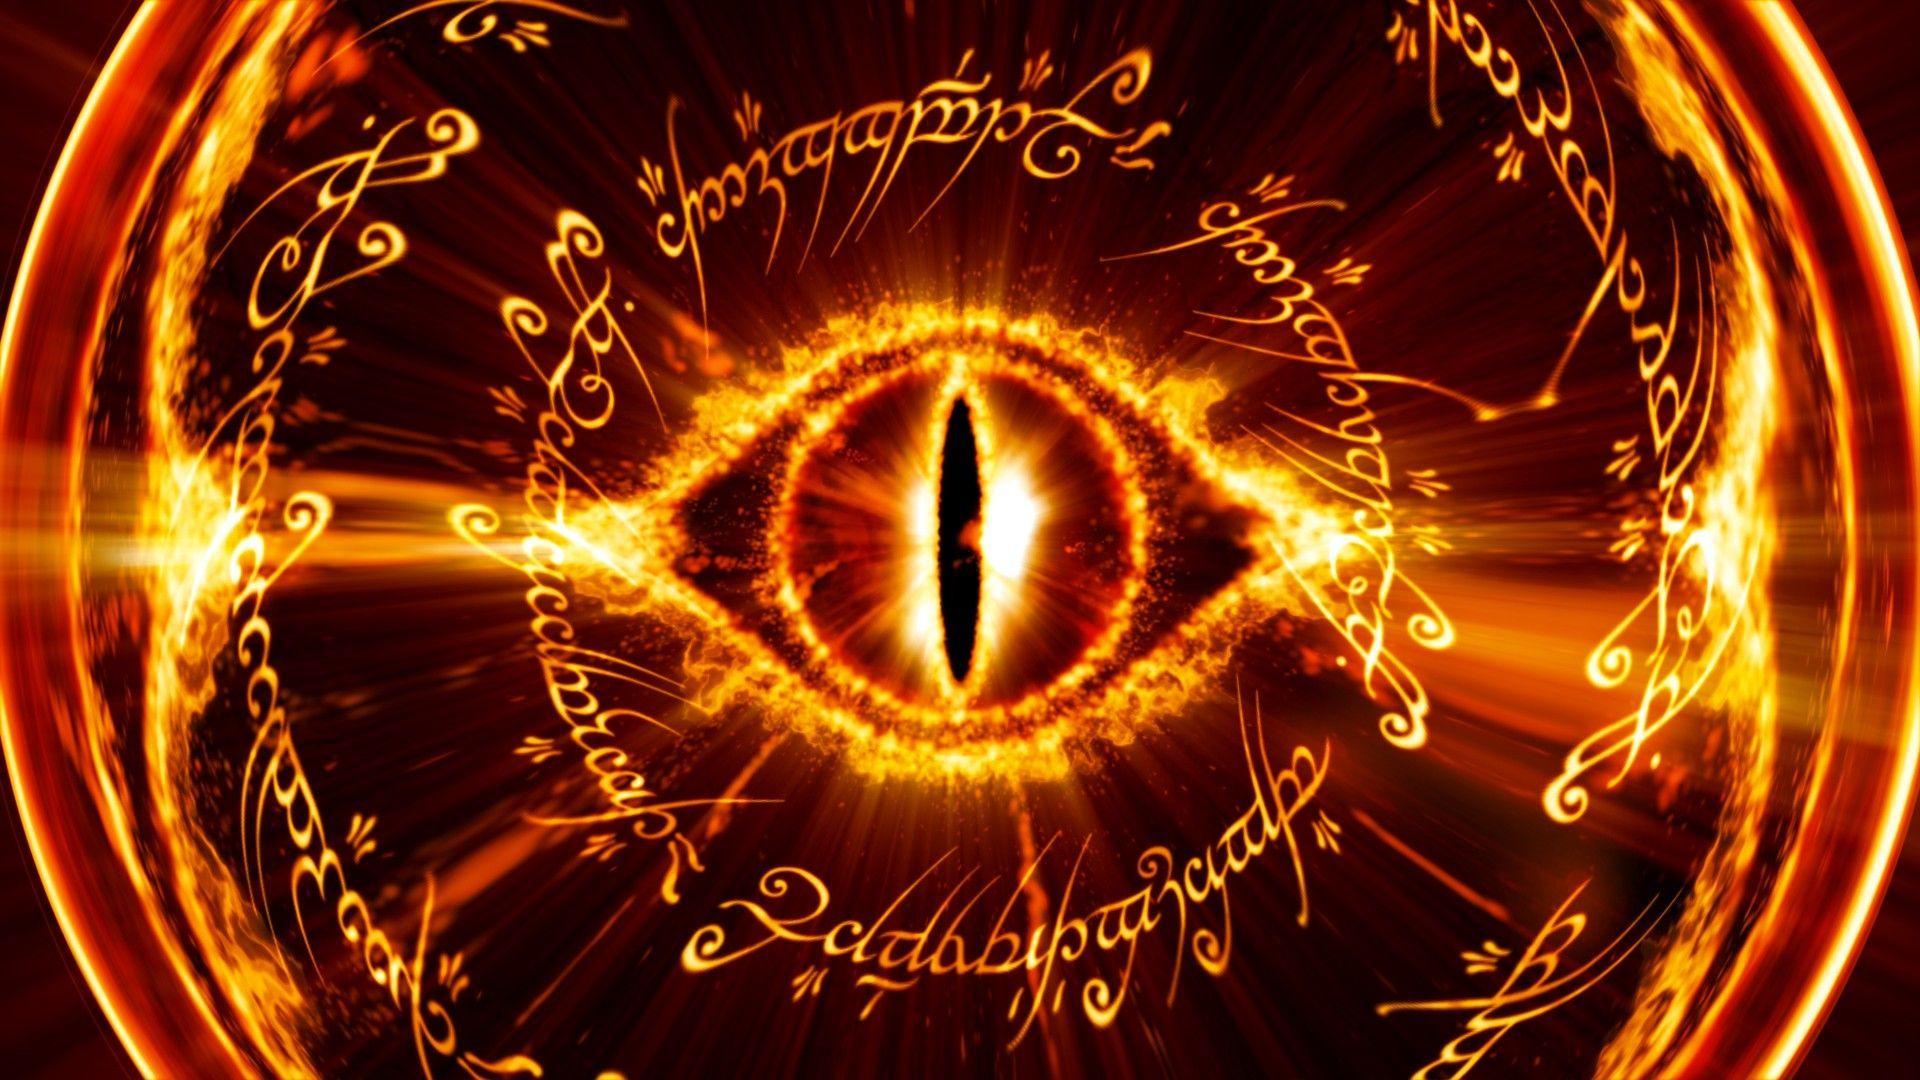 sauron wallpapers wallpaper cave on eye of sauron wallpapers